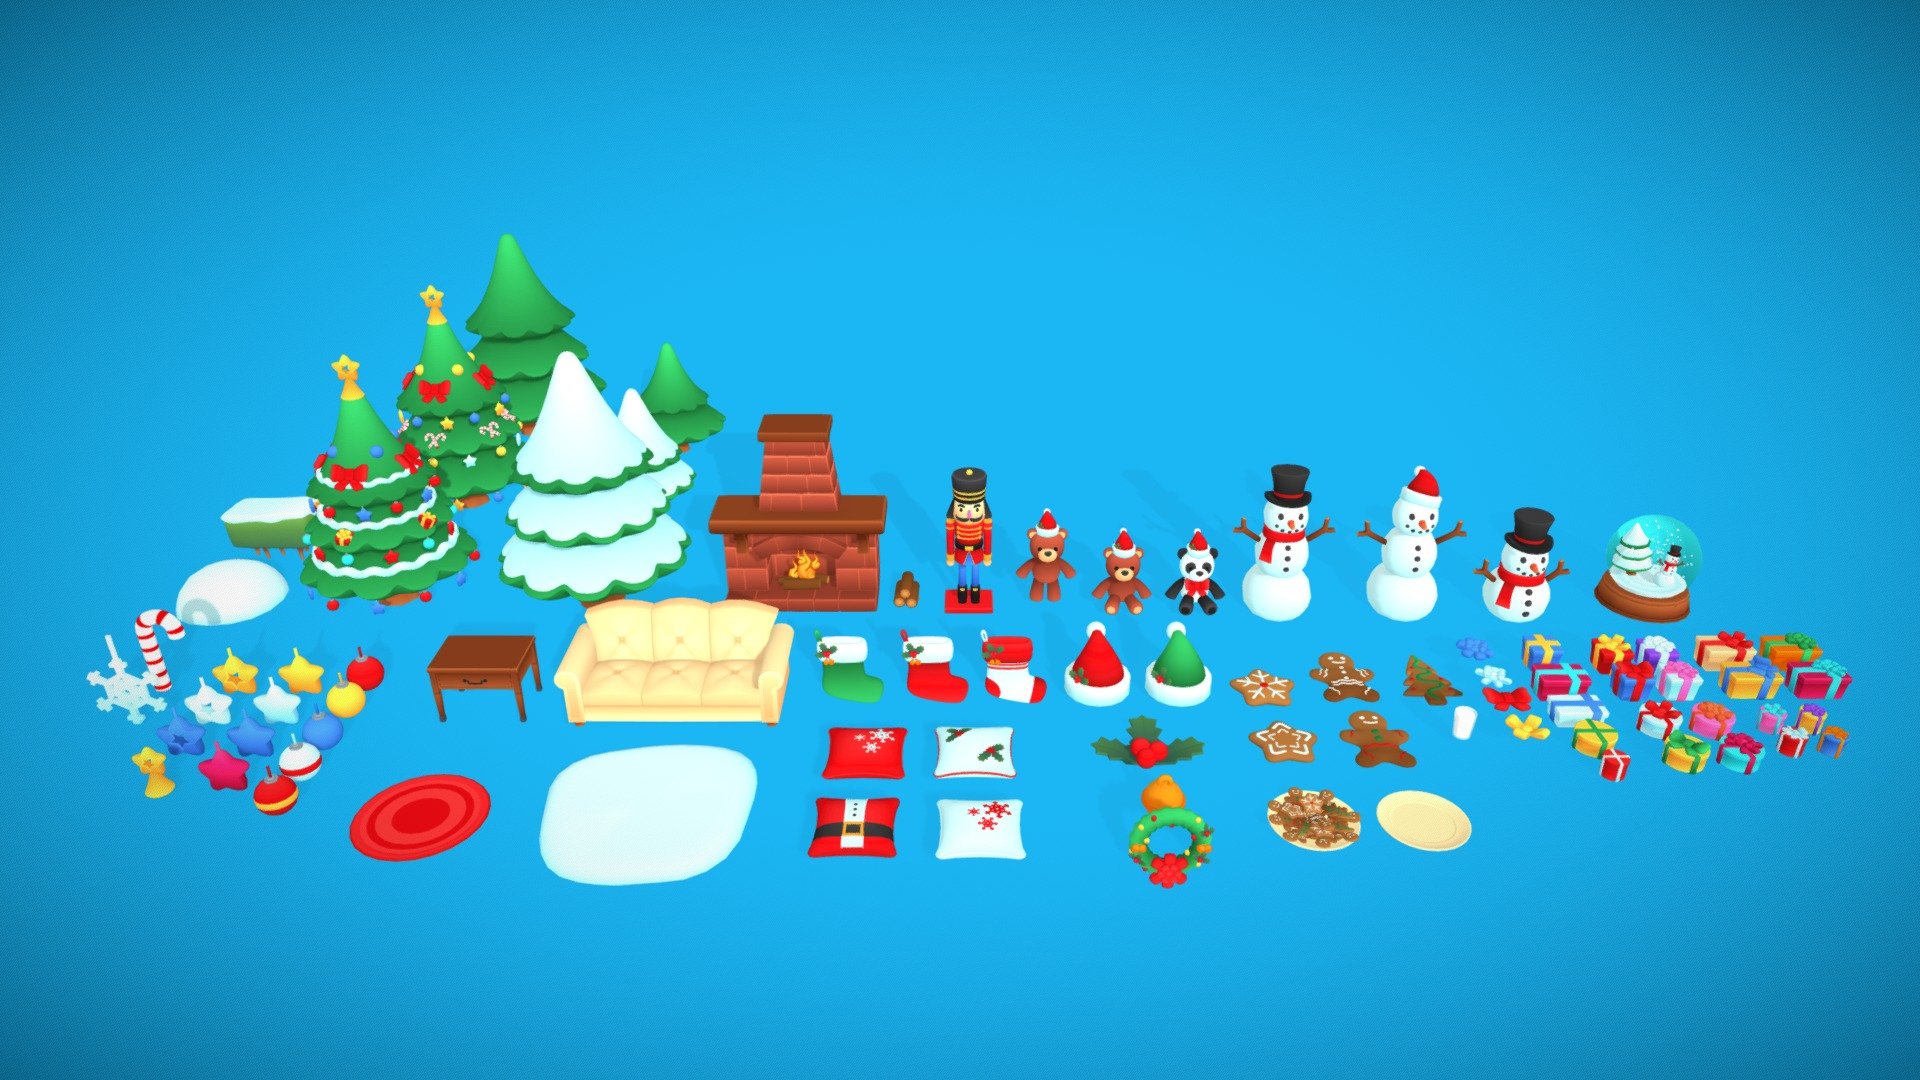 Happy holidays, This little Christmas pack is now available to use in your scenarios and games.
Pack includes:

Assets Fbx Format.

Assets Obj Format.

Blend Archive

Render images:

Render Marmoset 

Render Marmoset

Render Marmoset

Other similar packages:

Medieval Toon Assets Set----------&gt;https://skfb.ly/6UIYp

Cemetery Toon Assets Set-----------&gt;https://skfb.ly/6VL6D

Furniture - Kitchen Pack---------------------&gt;https://skfb.ly/owPT9

Furniture - Living Room Pack------&gt;https://skfb.ly/oxxHR - Christmas Toon Assets - Buy Royalty Free 3D model by Ergoni 3d model